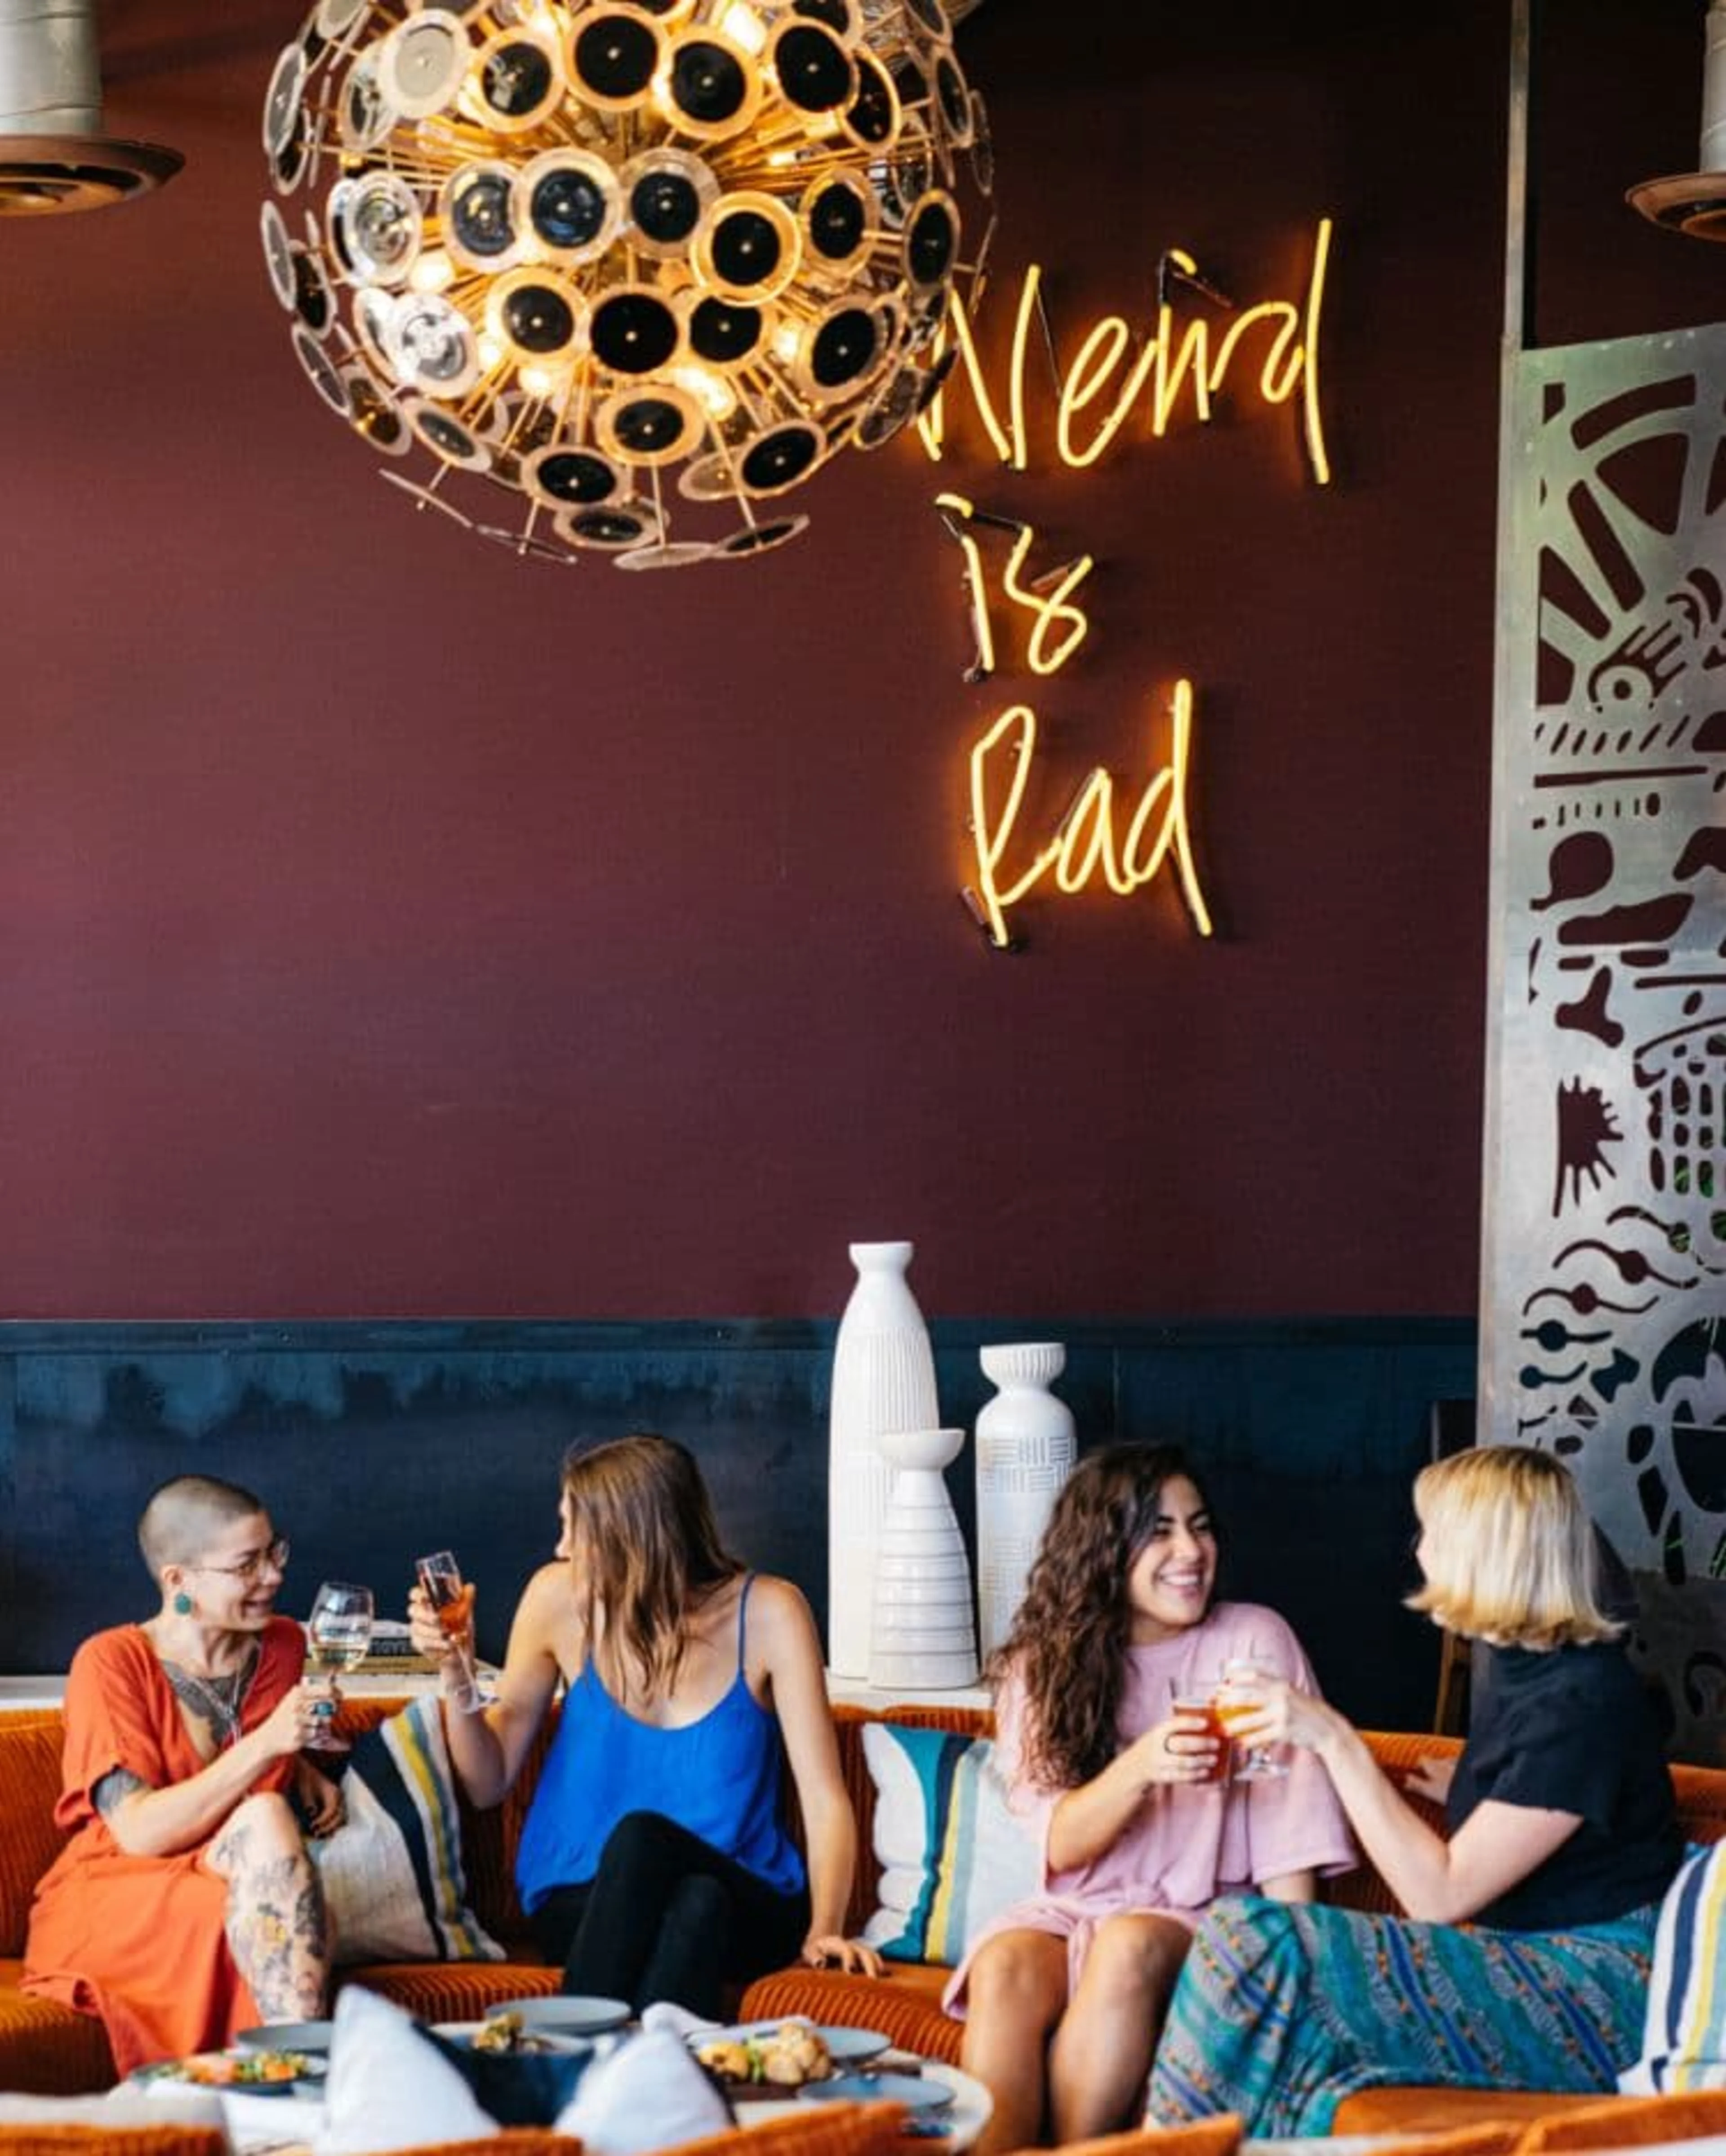 A burgundy wall with a sign "Weird is Rad" over four women clinking their wine glasses.